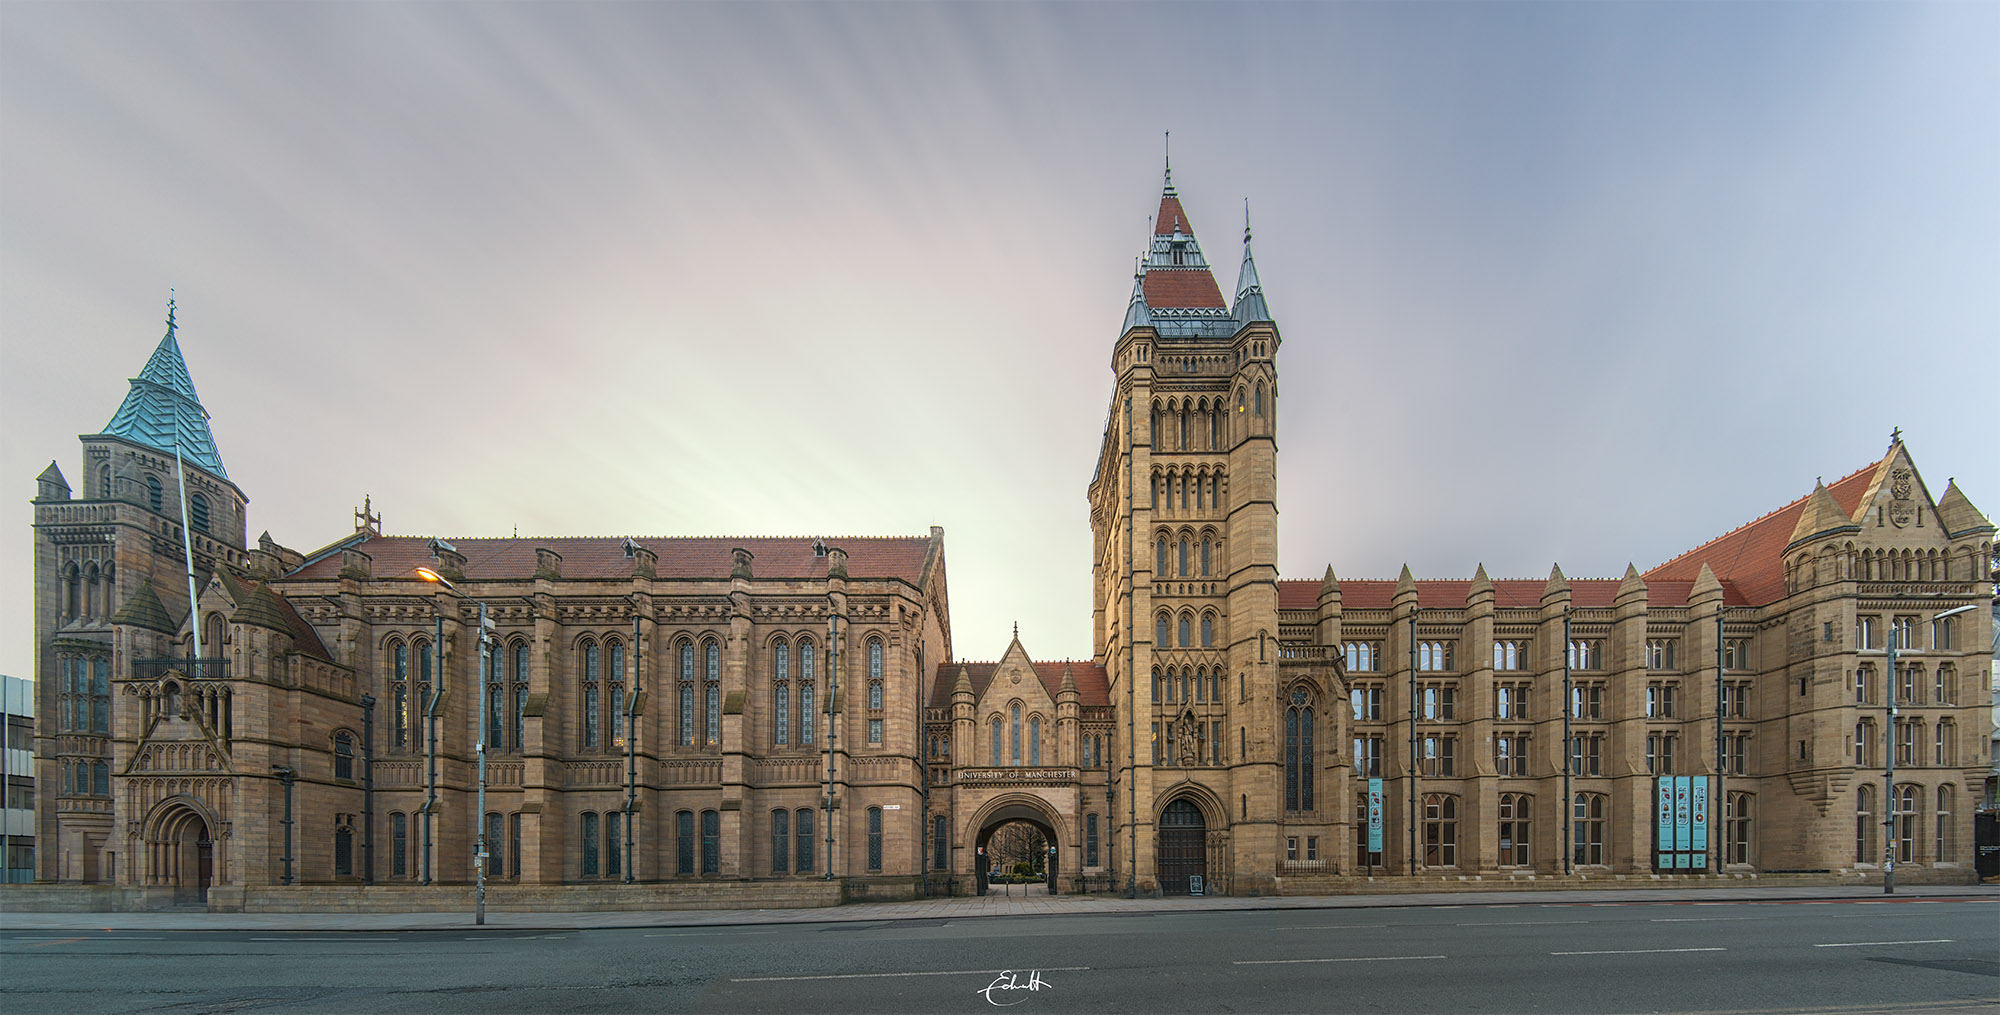 Whitworth Building in UoM